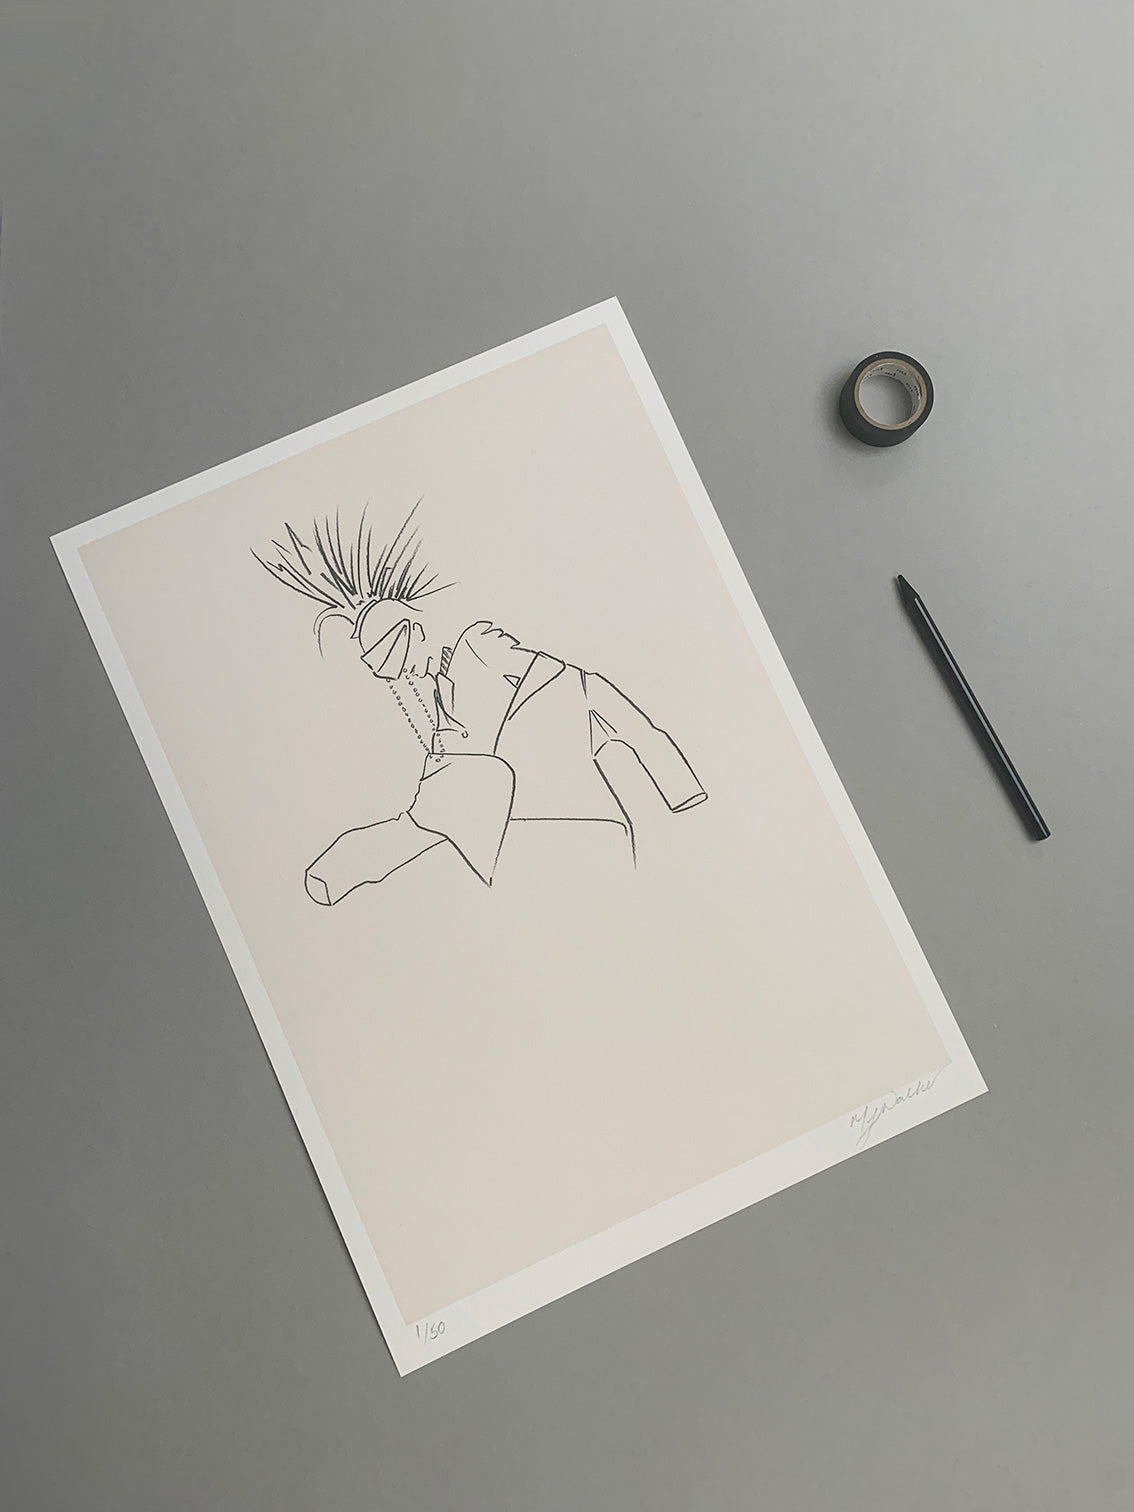 Minimalist fashion illustration of a person with a Mohawk on a grey background.